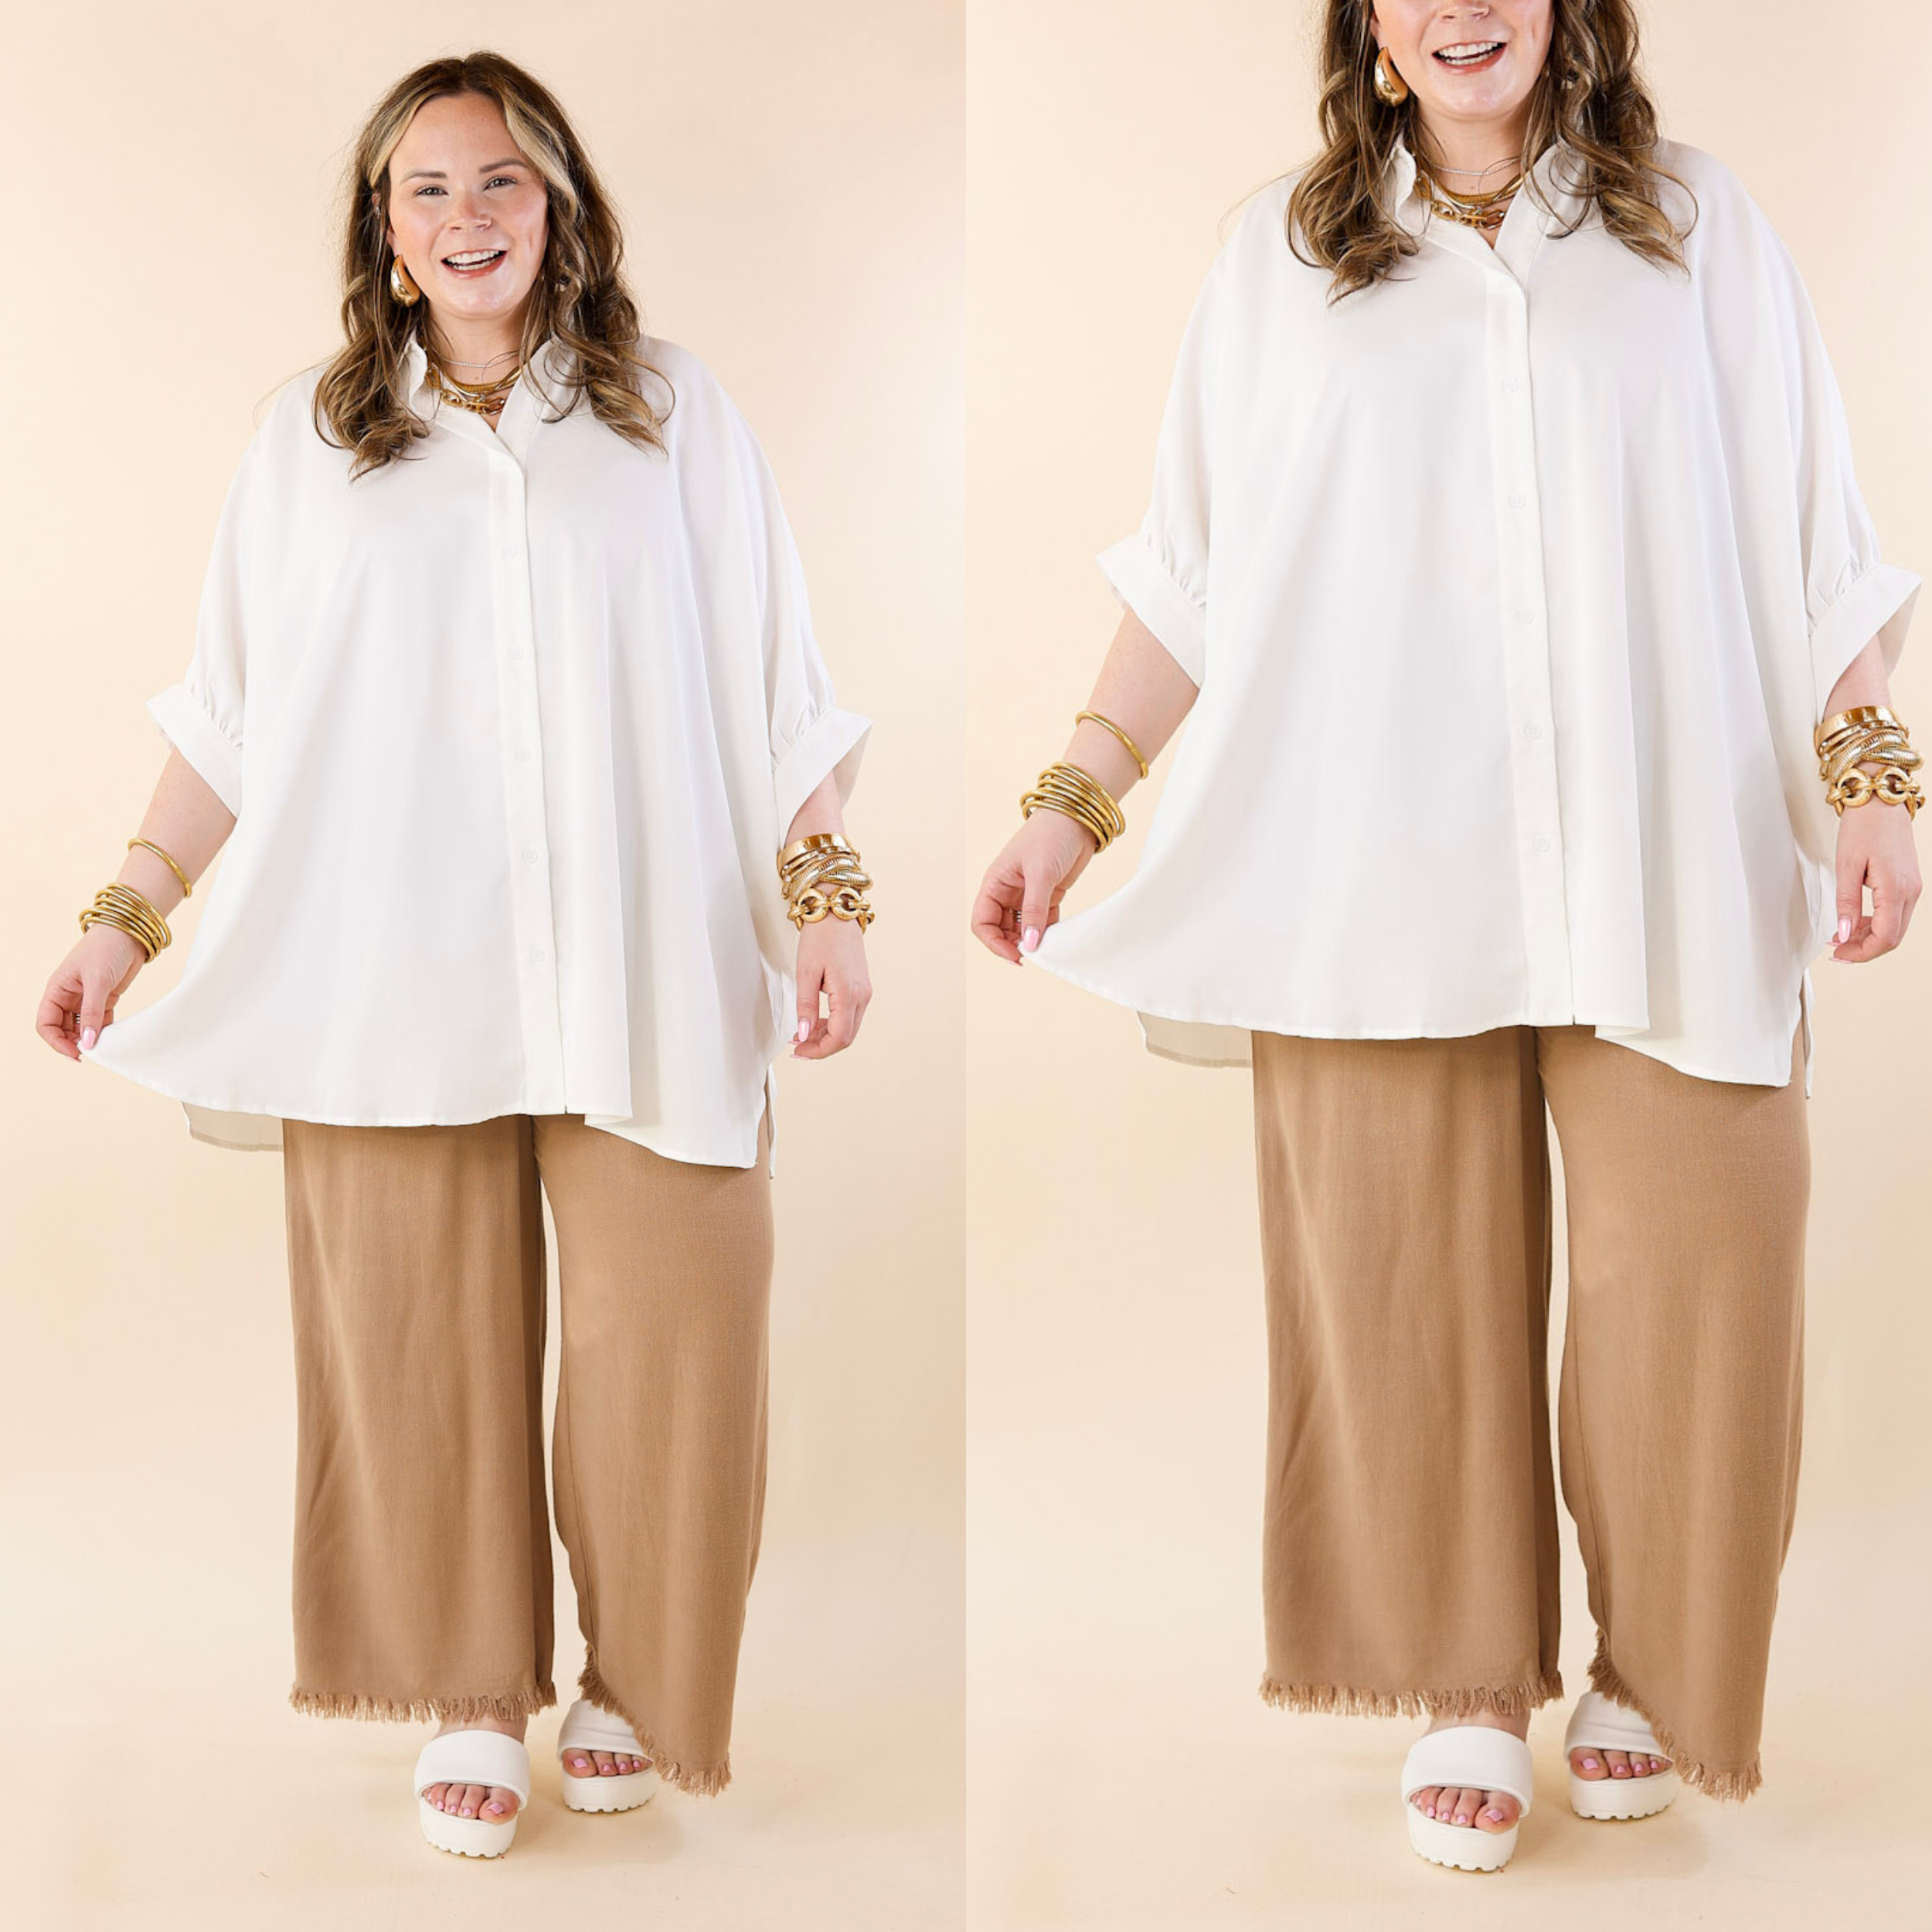 Right On Cue Elastic Waistband Cropped Pants with Frayed Hem in Mocha Brown - Giddy Up Glamour Boutique